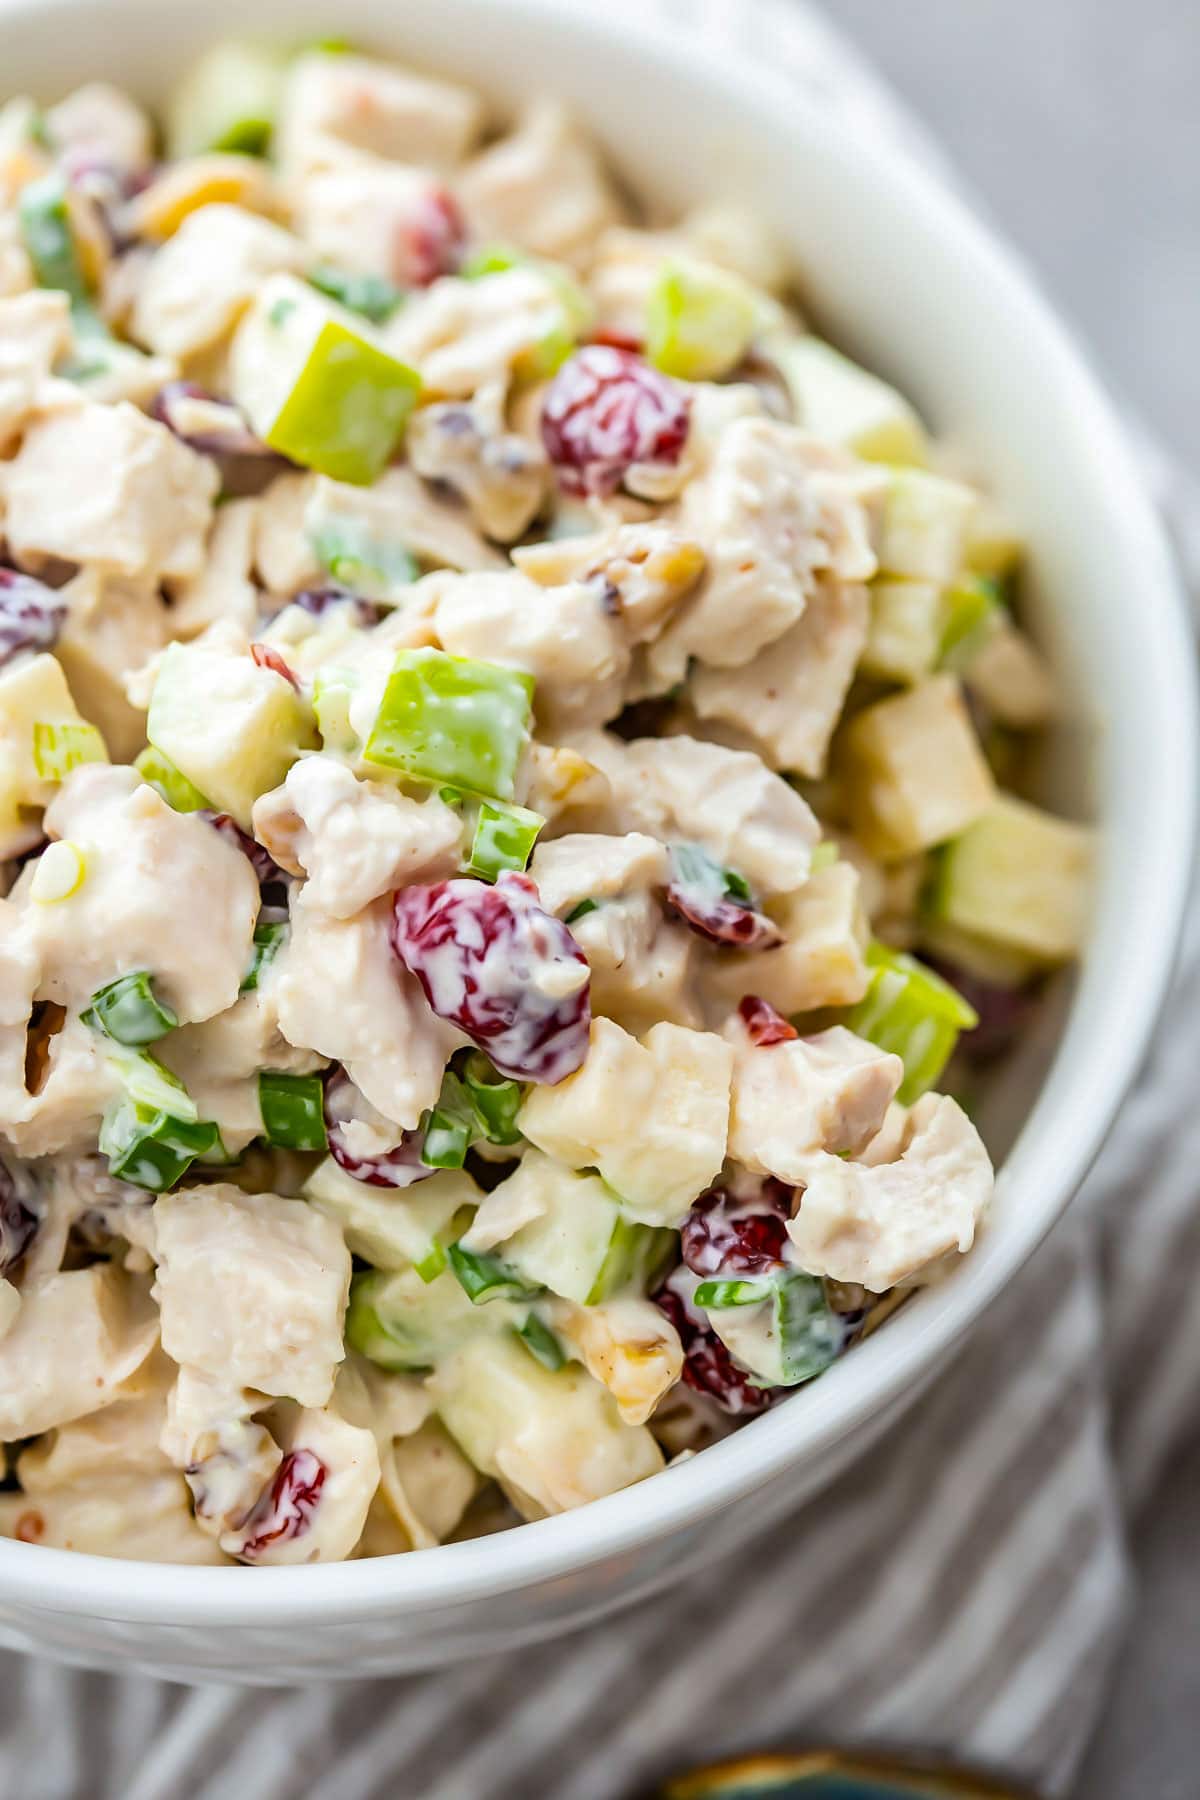 A bowl of cranberry walnut chicken salad, with diced chicken, diced green apples, and dried cranberries.